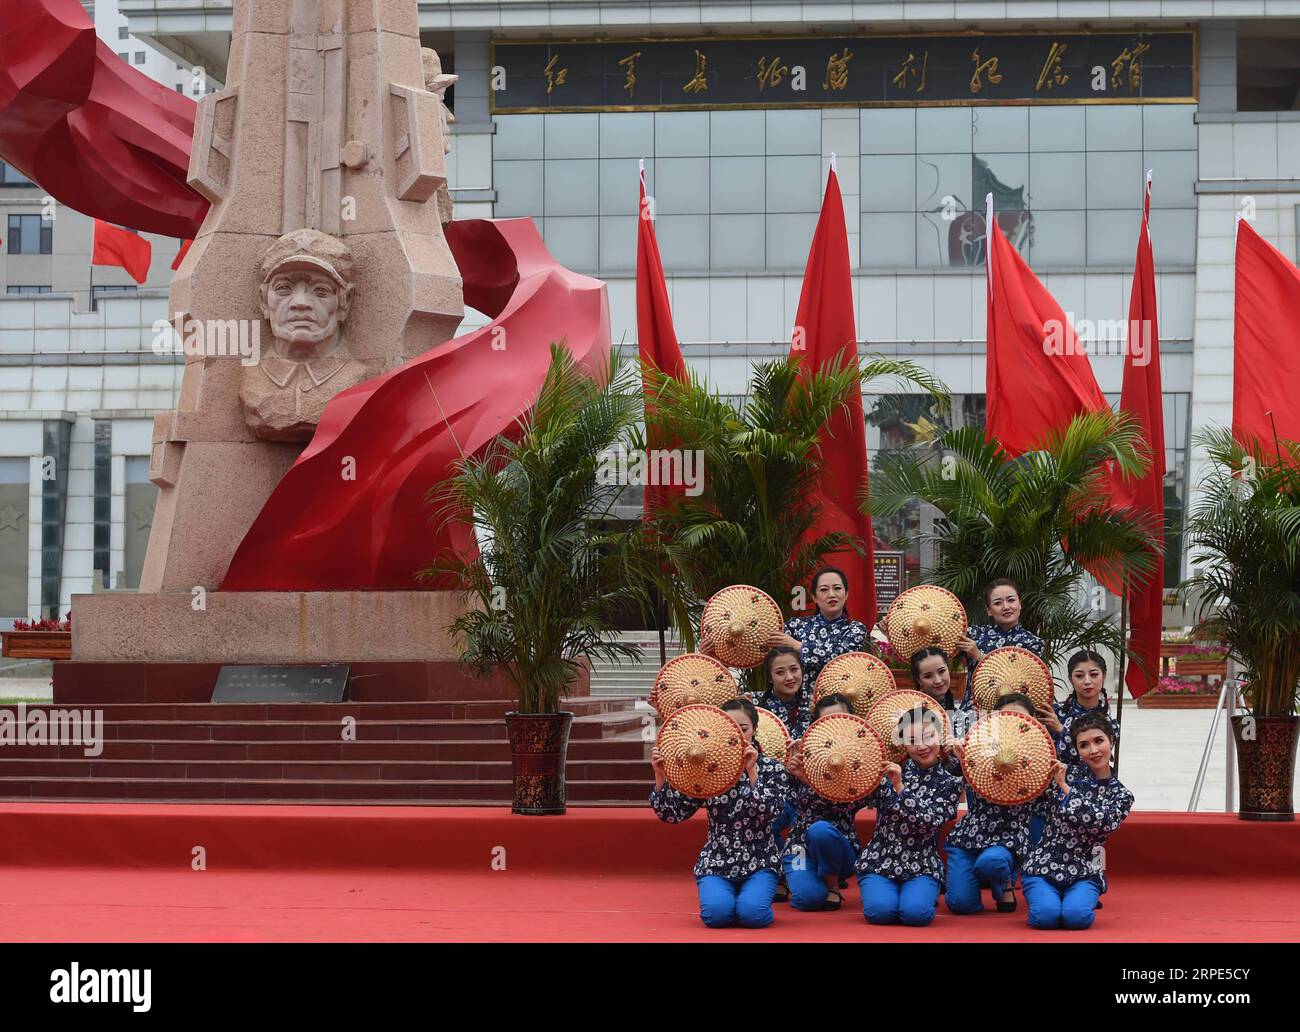 (190818) -- HUINING, Aug. 18, 2019 -- Staff members from Gansu Daily perform dance during an event marking the conclusion of an activity that took journalists to retrace the route of the Long March, in Huining, northwest China s Gansu Province, Aug. 18, 2019. The activity, held from June 11 to Aug. 18, was aimed at paying tribute to the revolutionary martyrs and passing on the traditions of revolution. The Long March was a military maneuver carried out by the Chinese Workers and Peasants Red Army from 1934 to 1936. During this period, they left their bases and marched through rivers, mountains Stock Photo